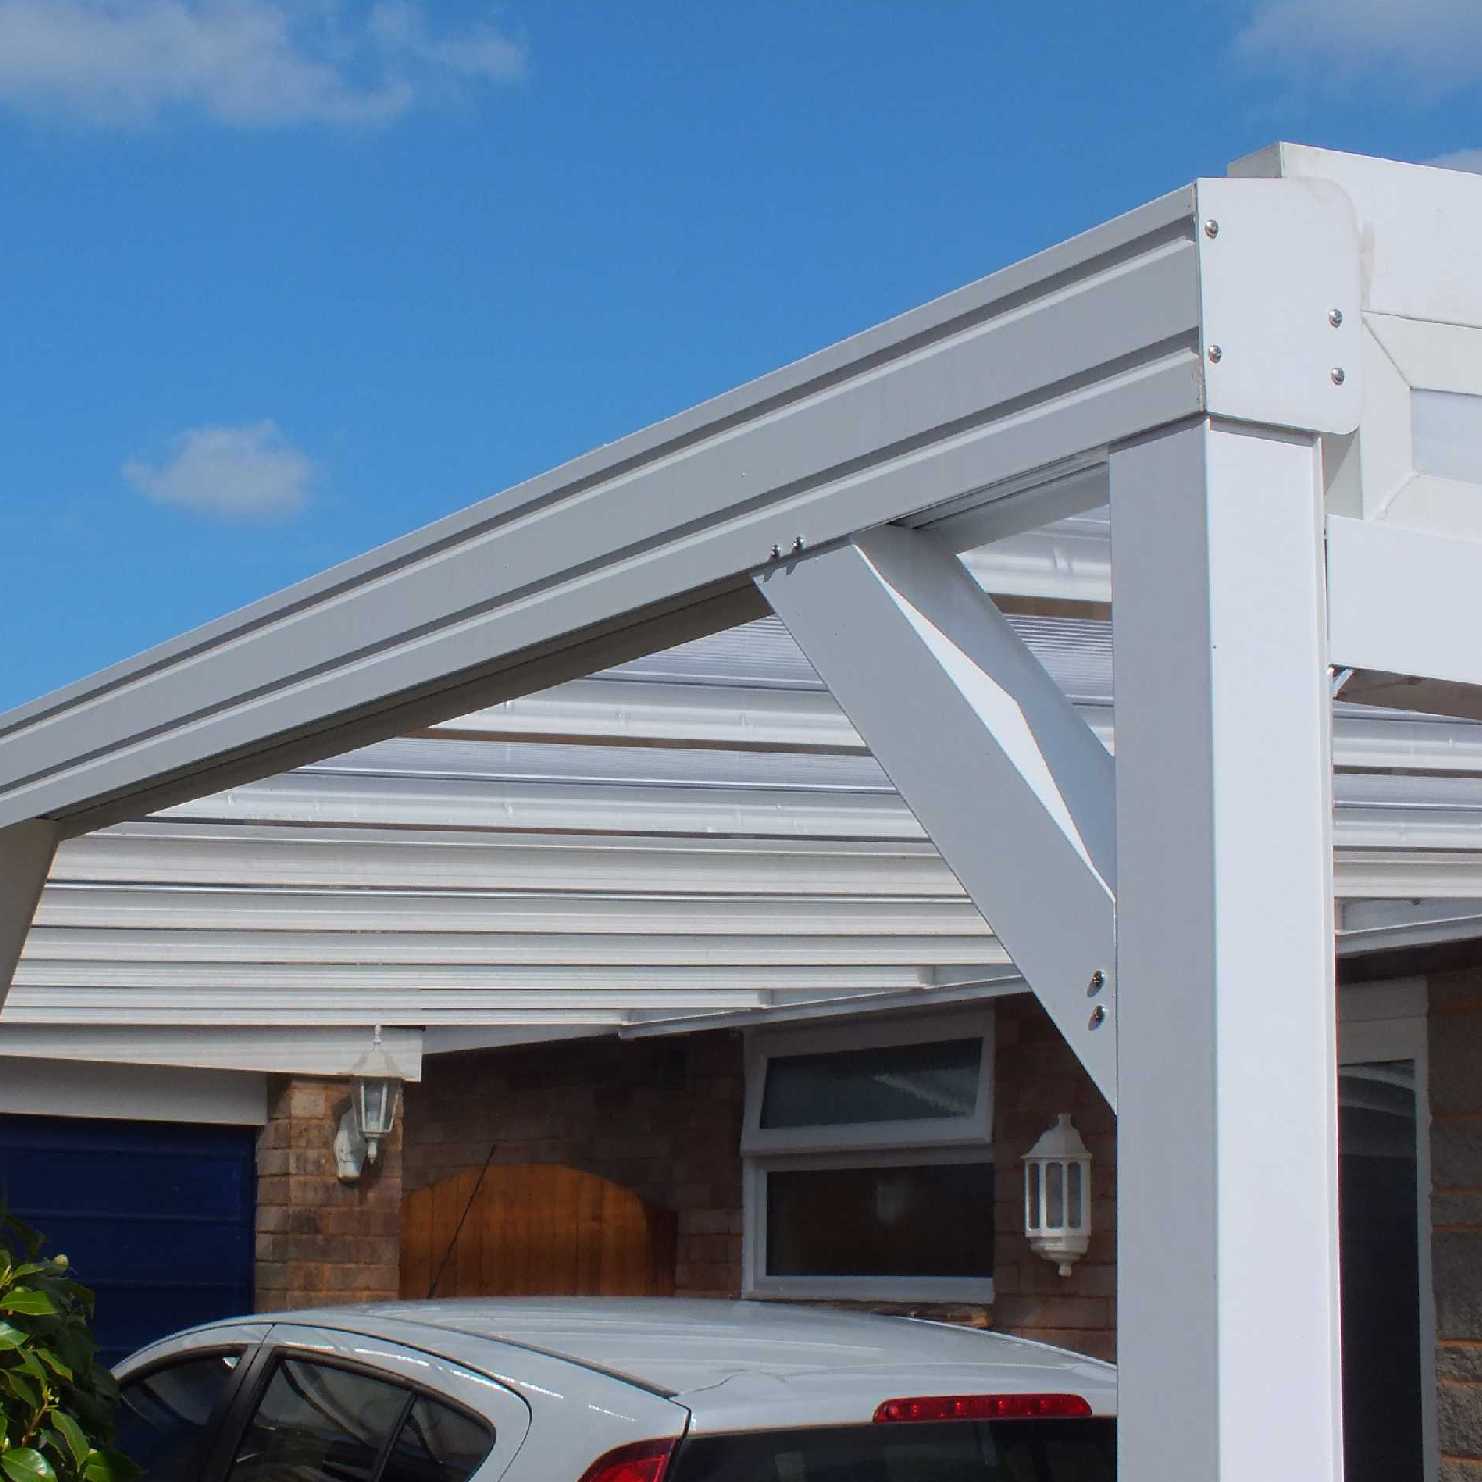 Great deals on Omega Smart Lean-To Canopy, White with 16mm Polycarbonate Glazing - 5.2m (W) x 3.0m (P), (3) Supporting Posts